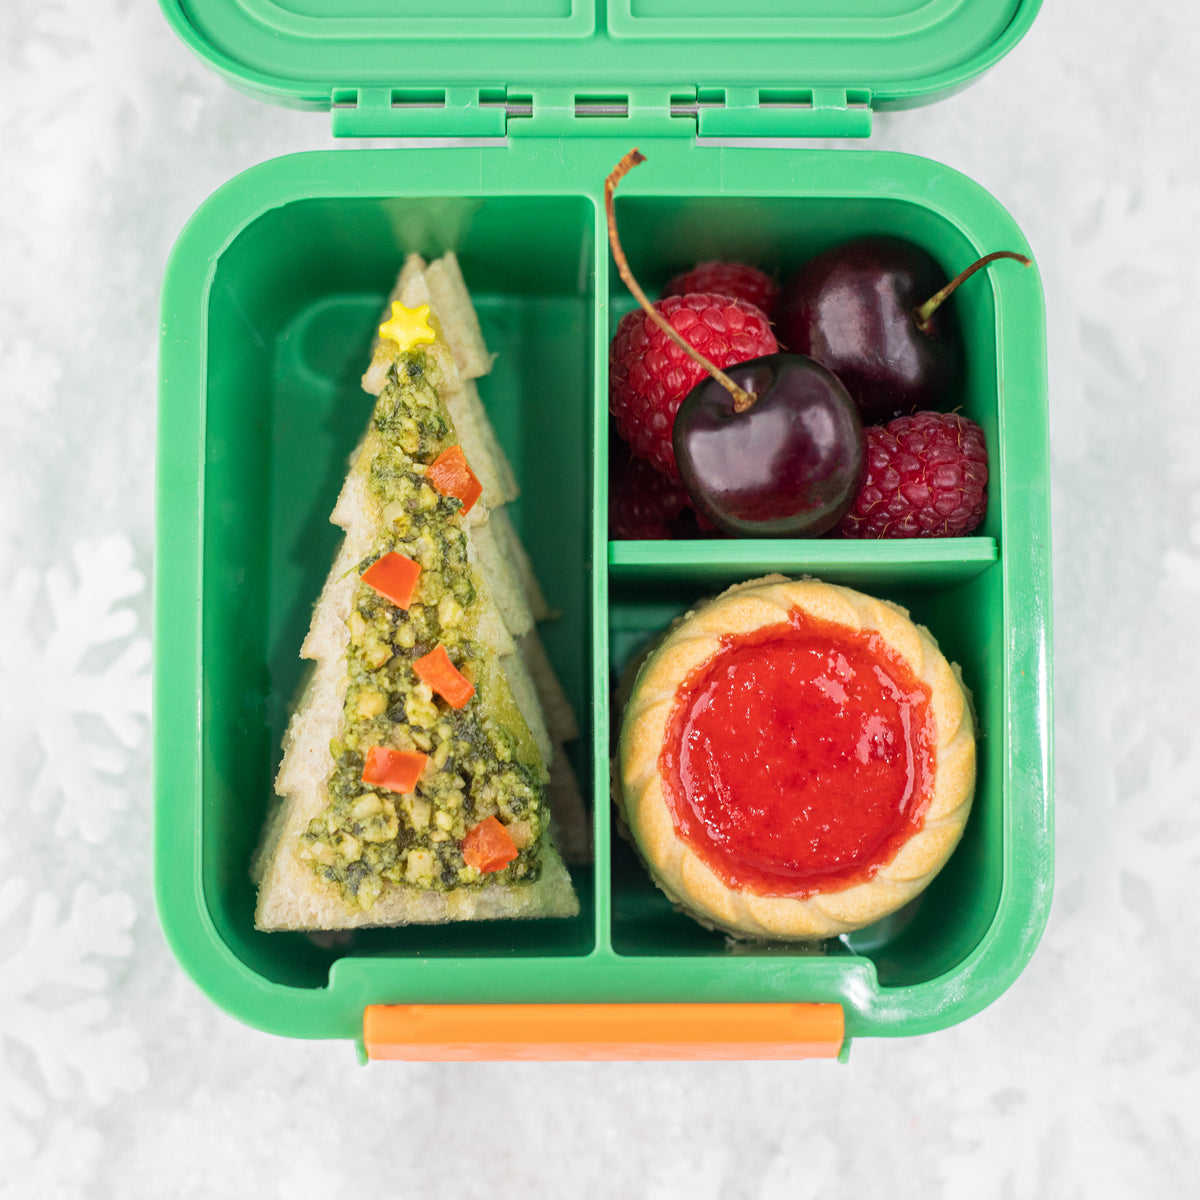 Lunch Punch Christmas Cutter and Bento Set